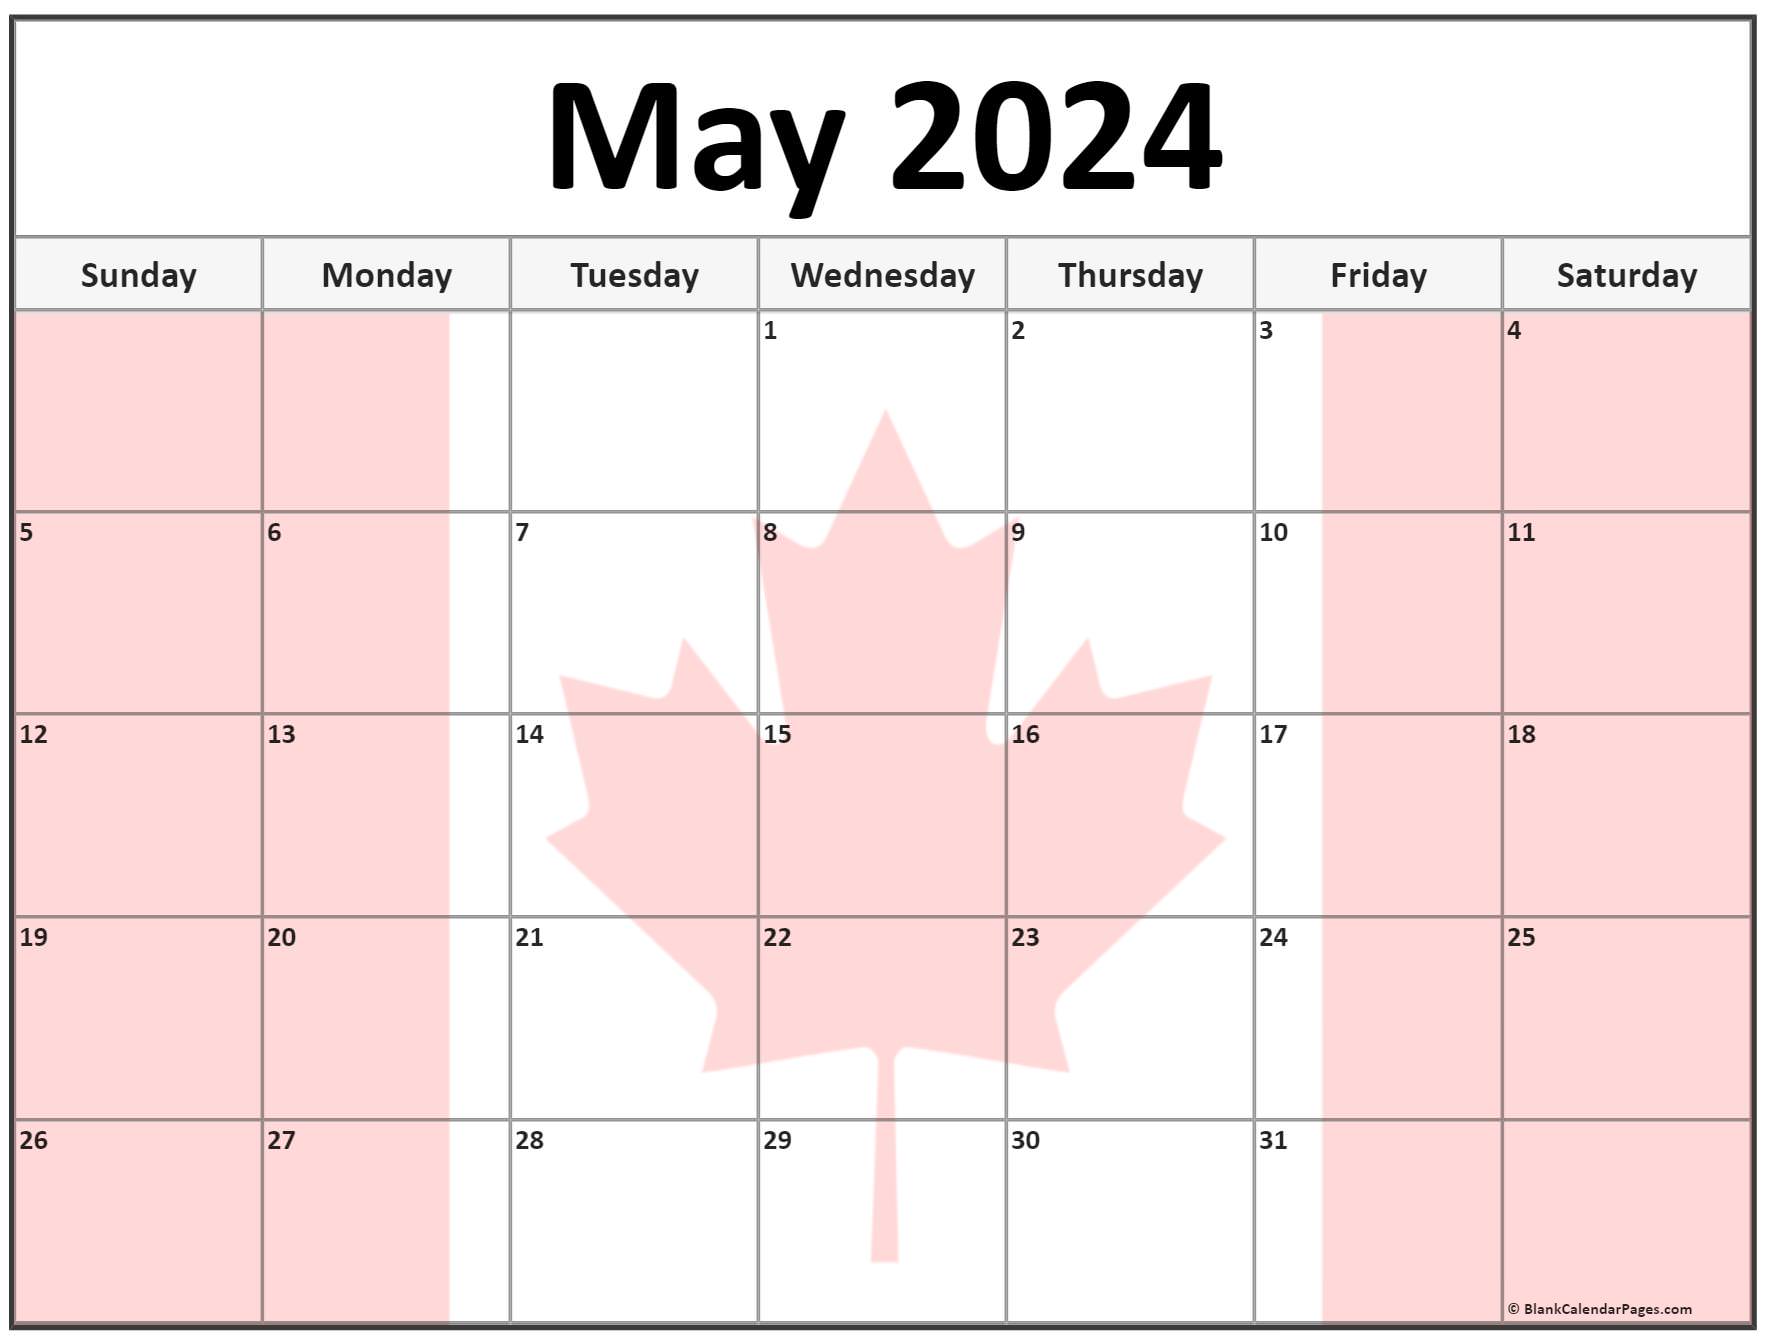 collection-of-may-2024-photo-calendars-with-image-filters